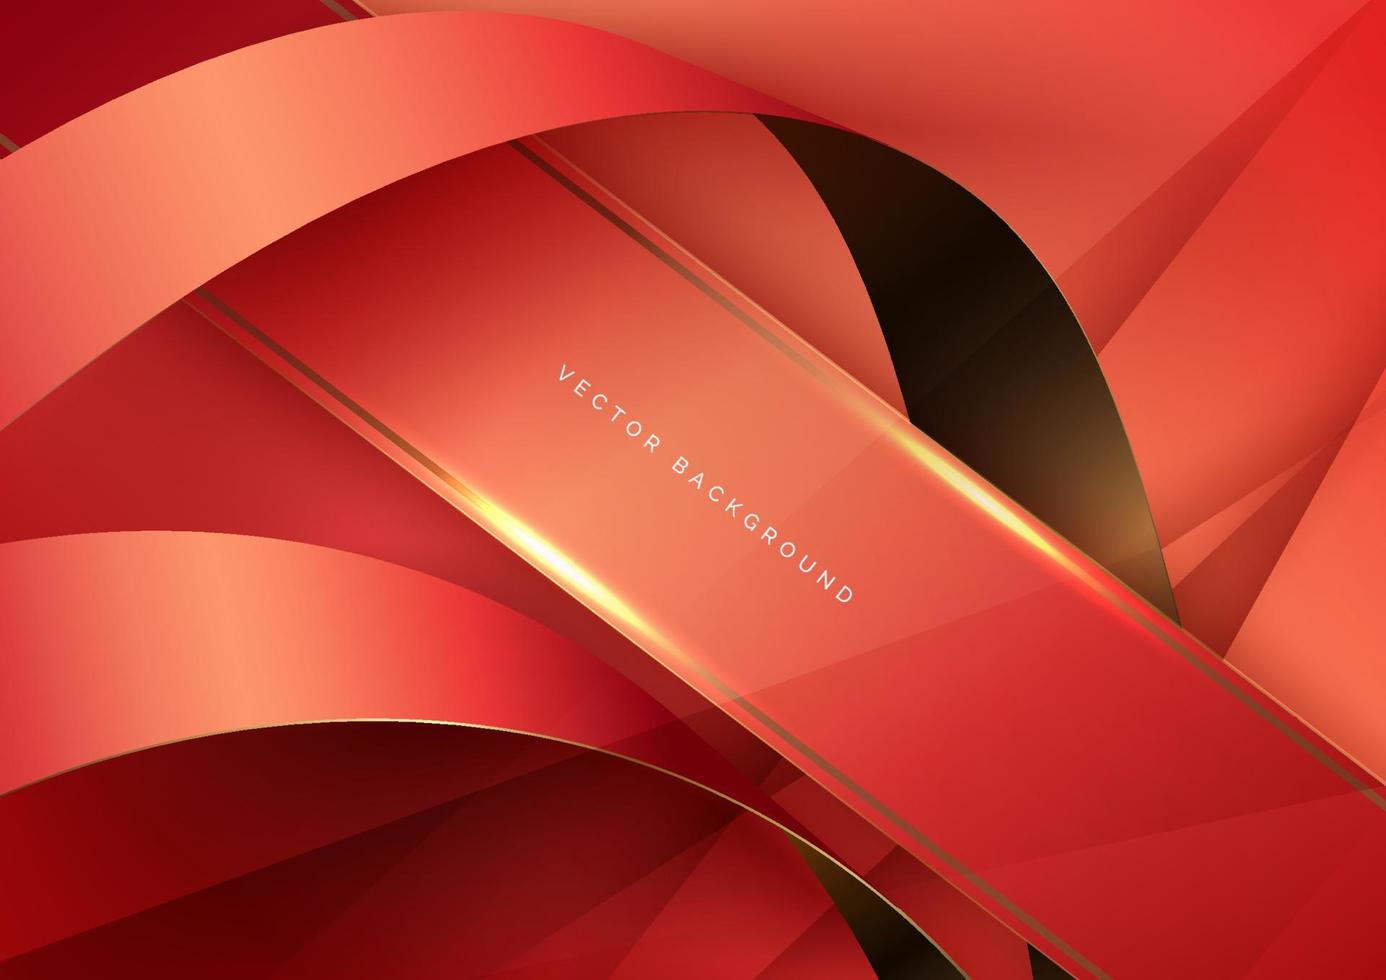 Abstract 3d curved red and gold ribbon on red background with lighting effect copy space for text. Luxury design style. vector